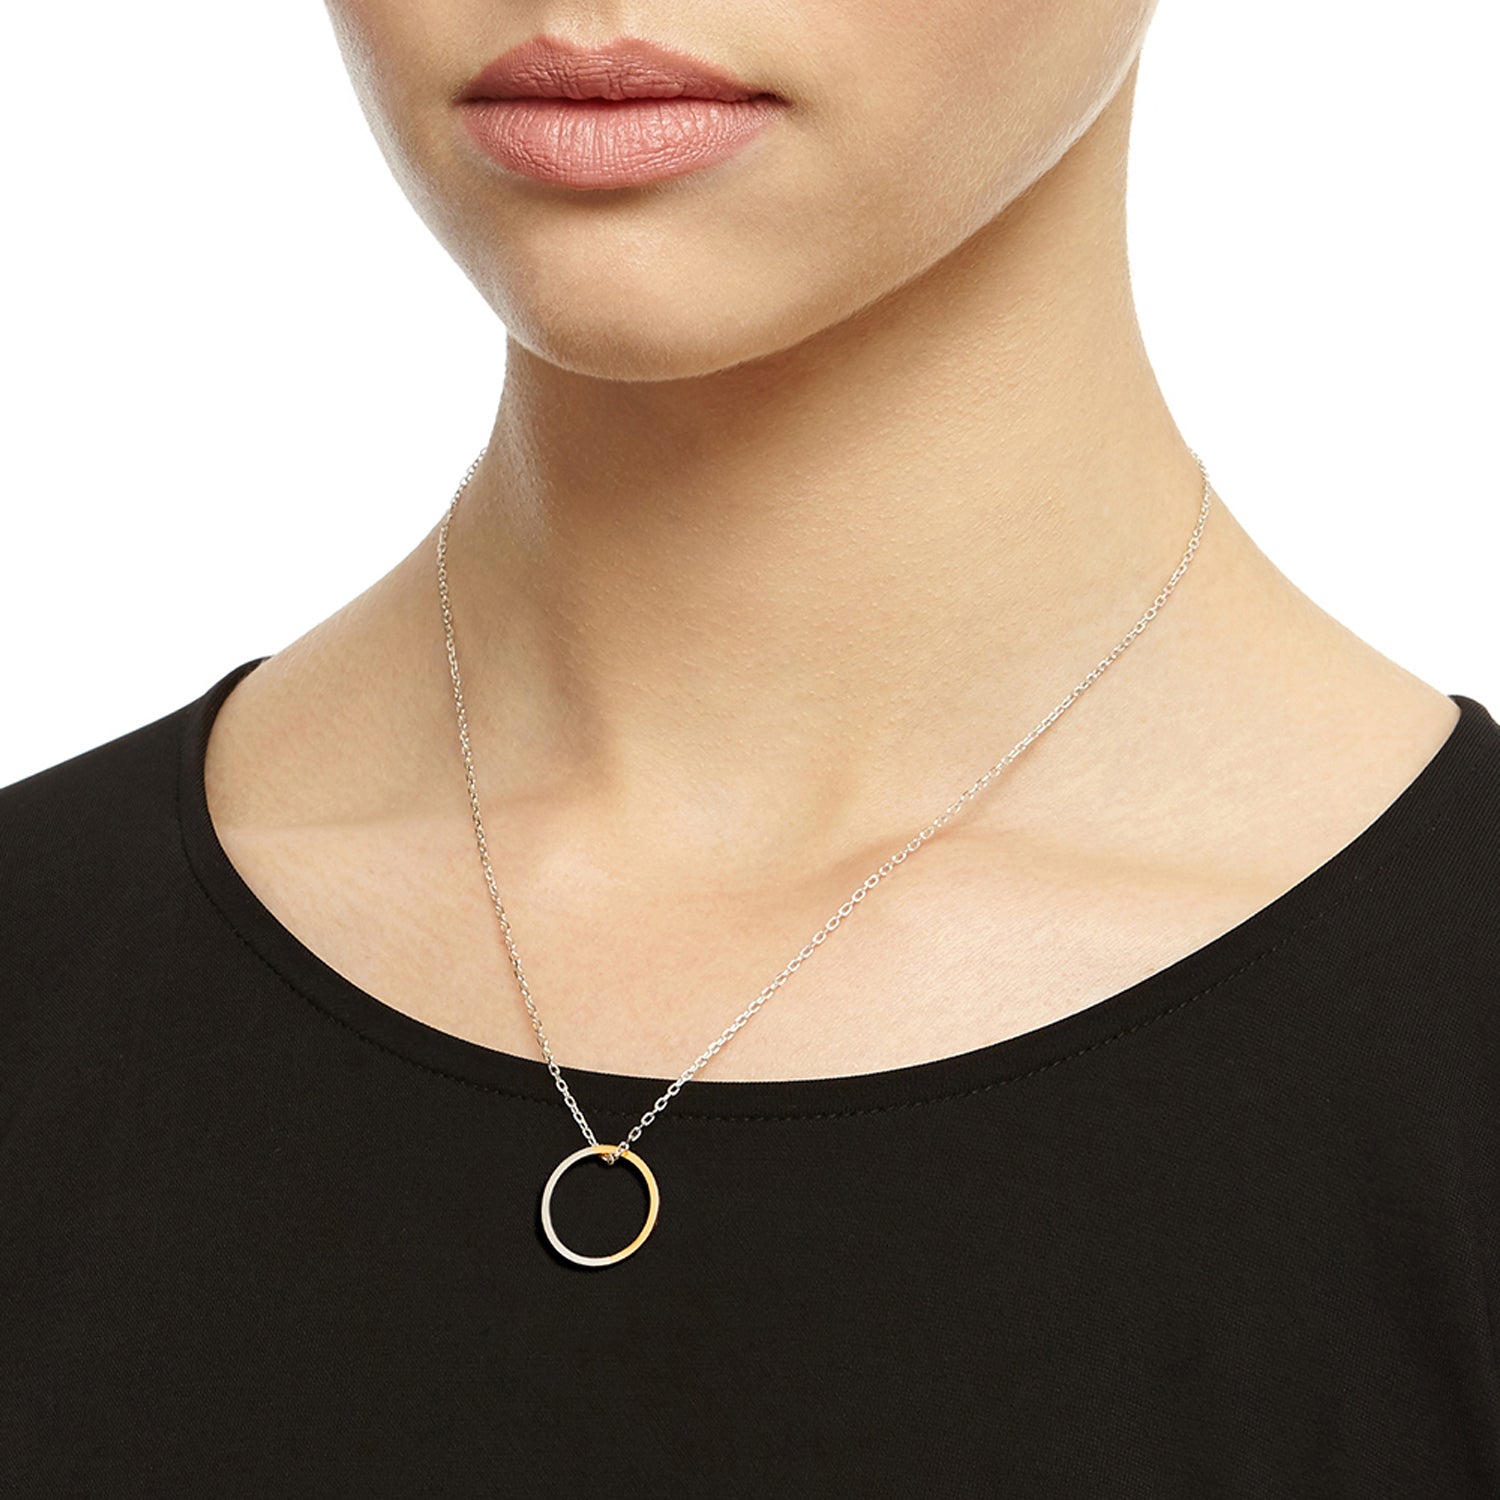 Two-tone Circle Necklace - 9k Yellow Gold & Silver - Myia Bonner Jewellery